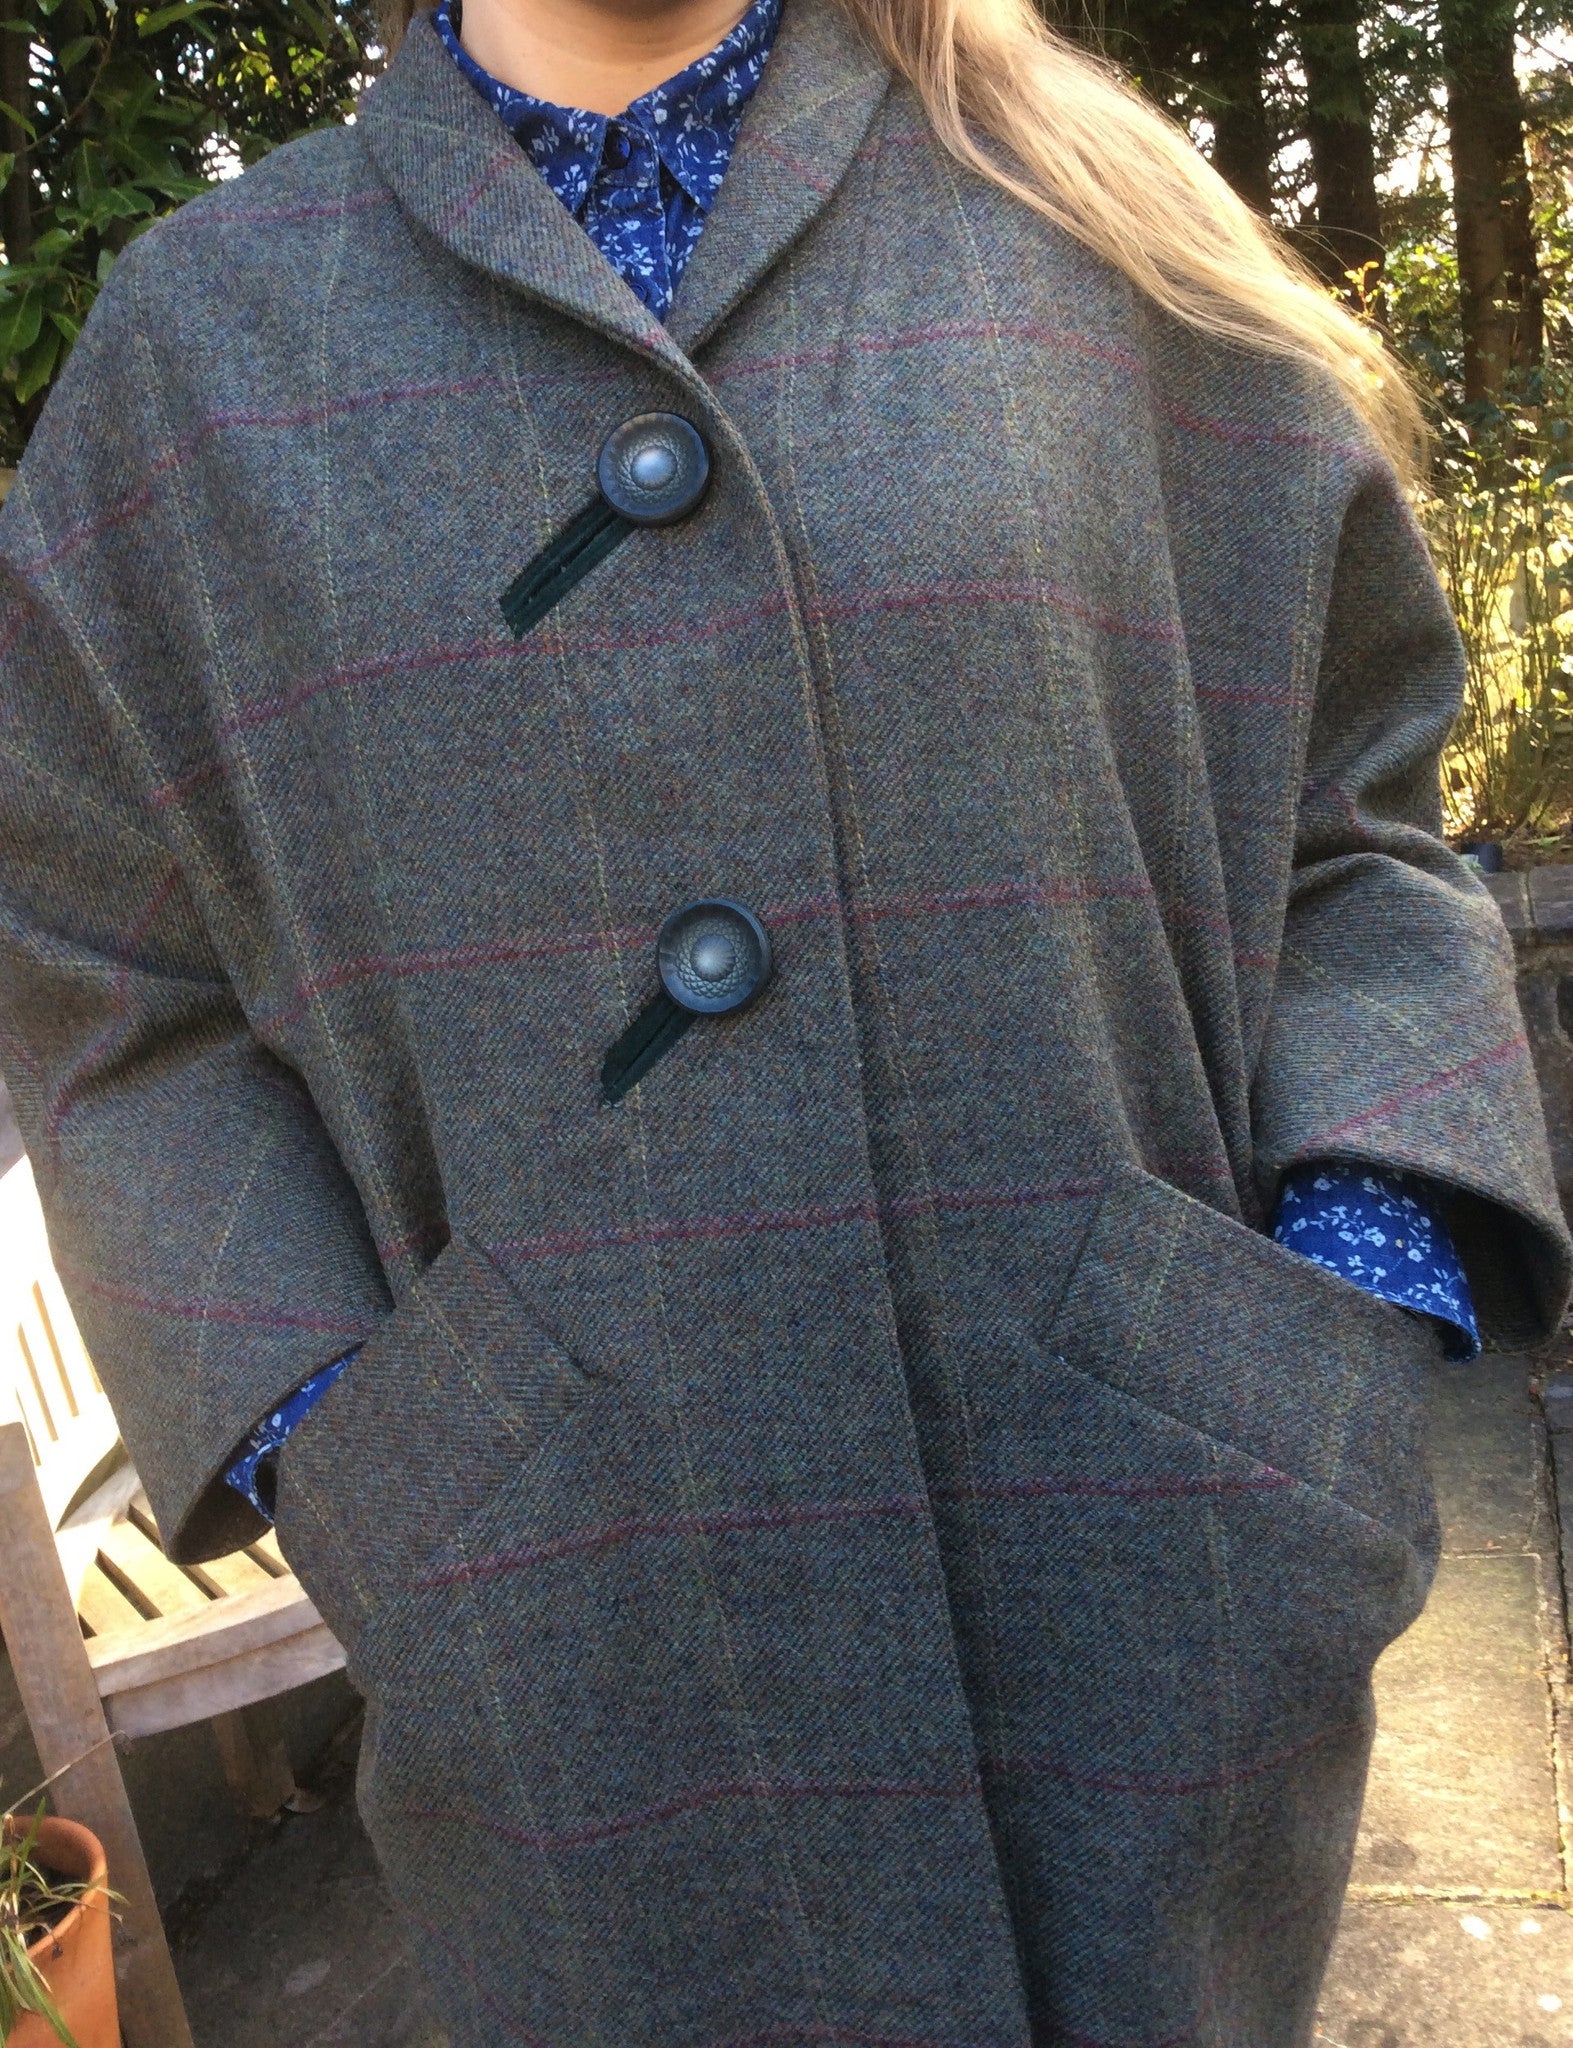 My new coat - with pockets big enough for a dead rabbit!